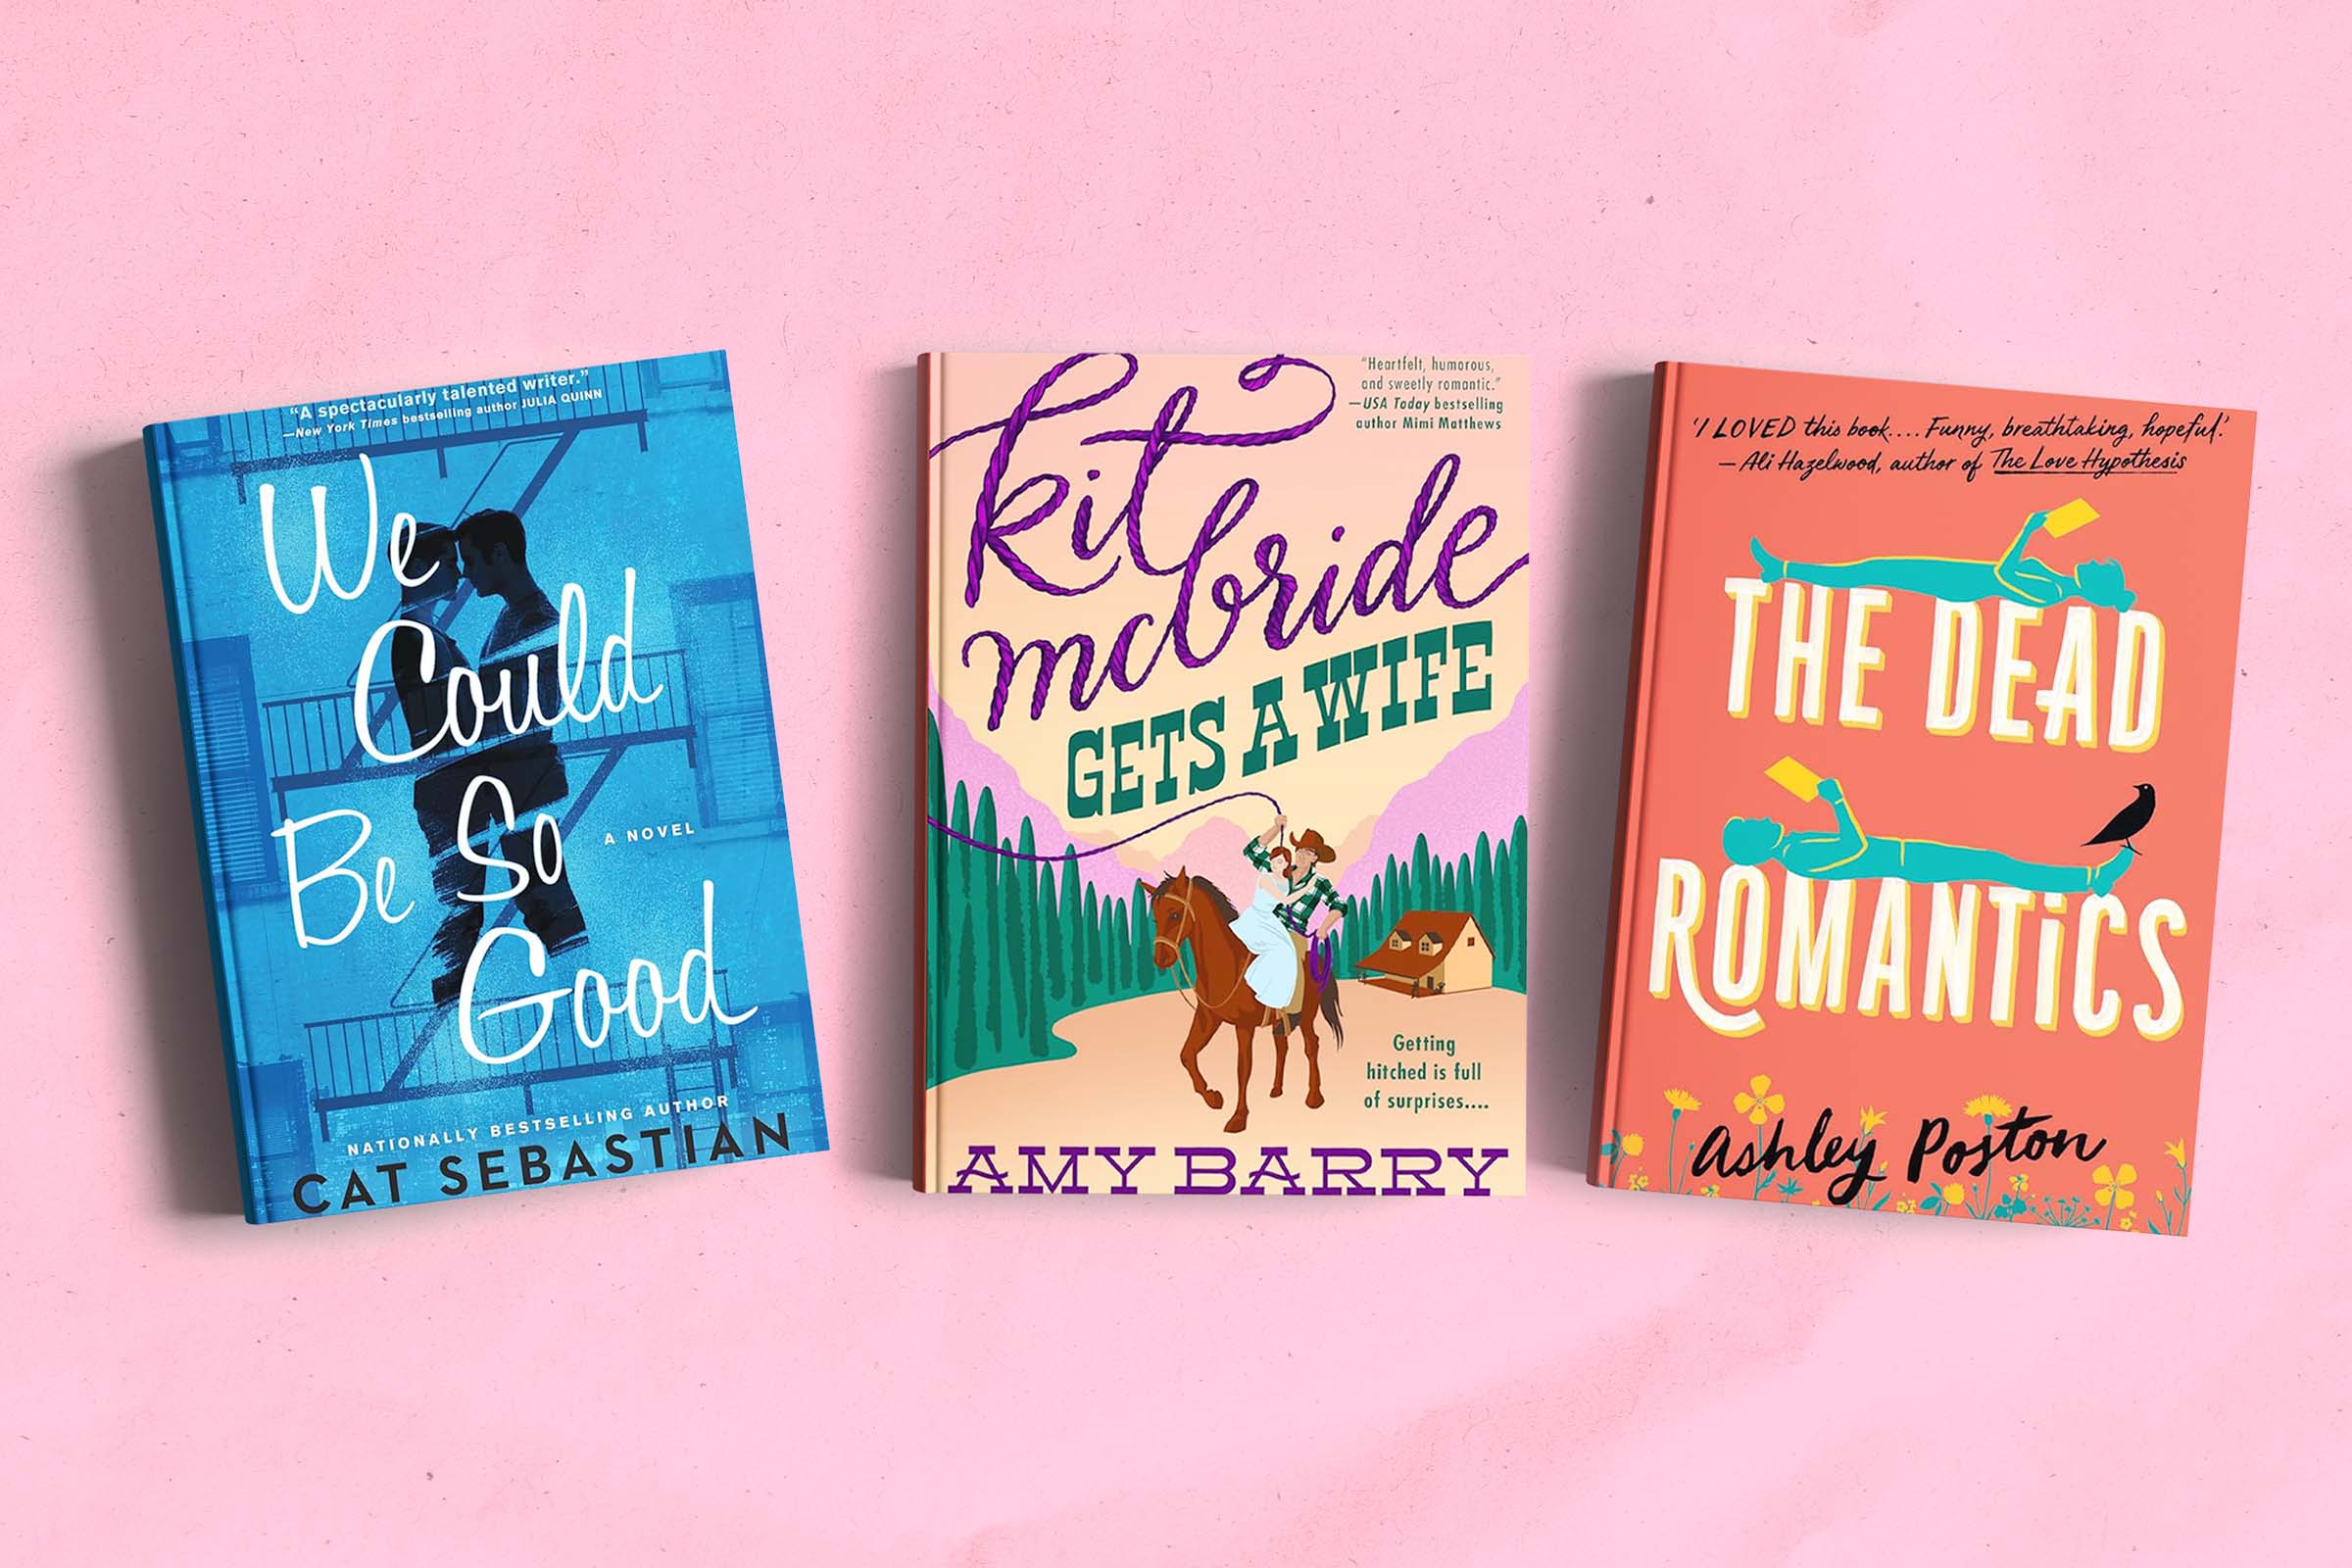 Book covers of the new romantic book recommendations